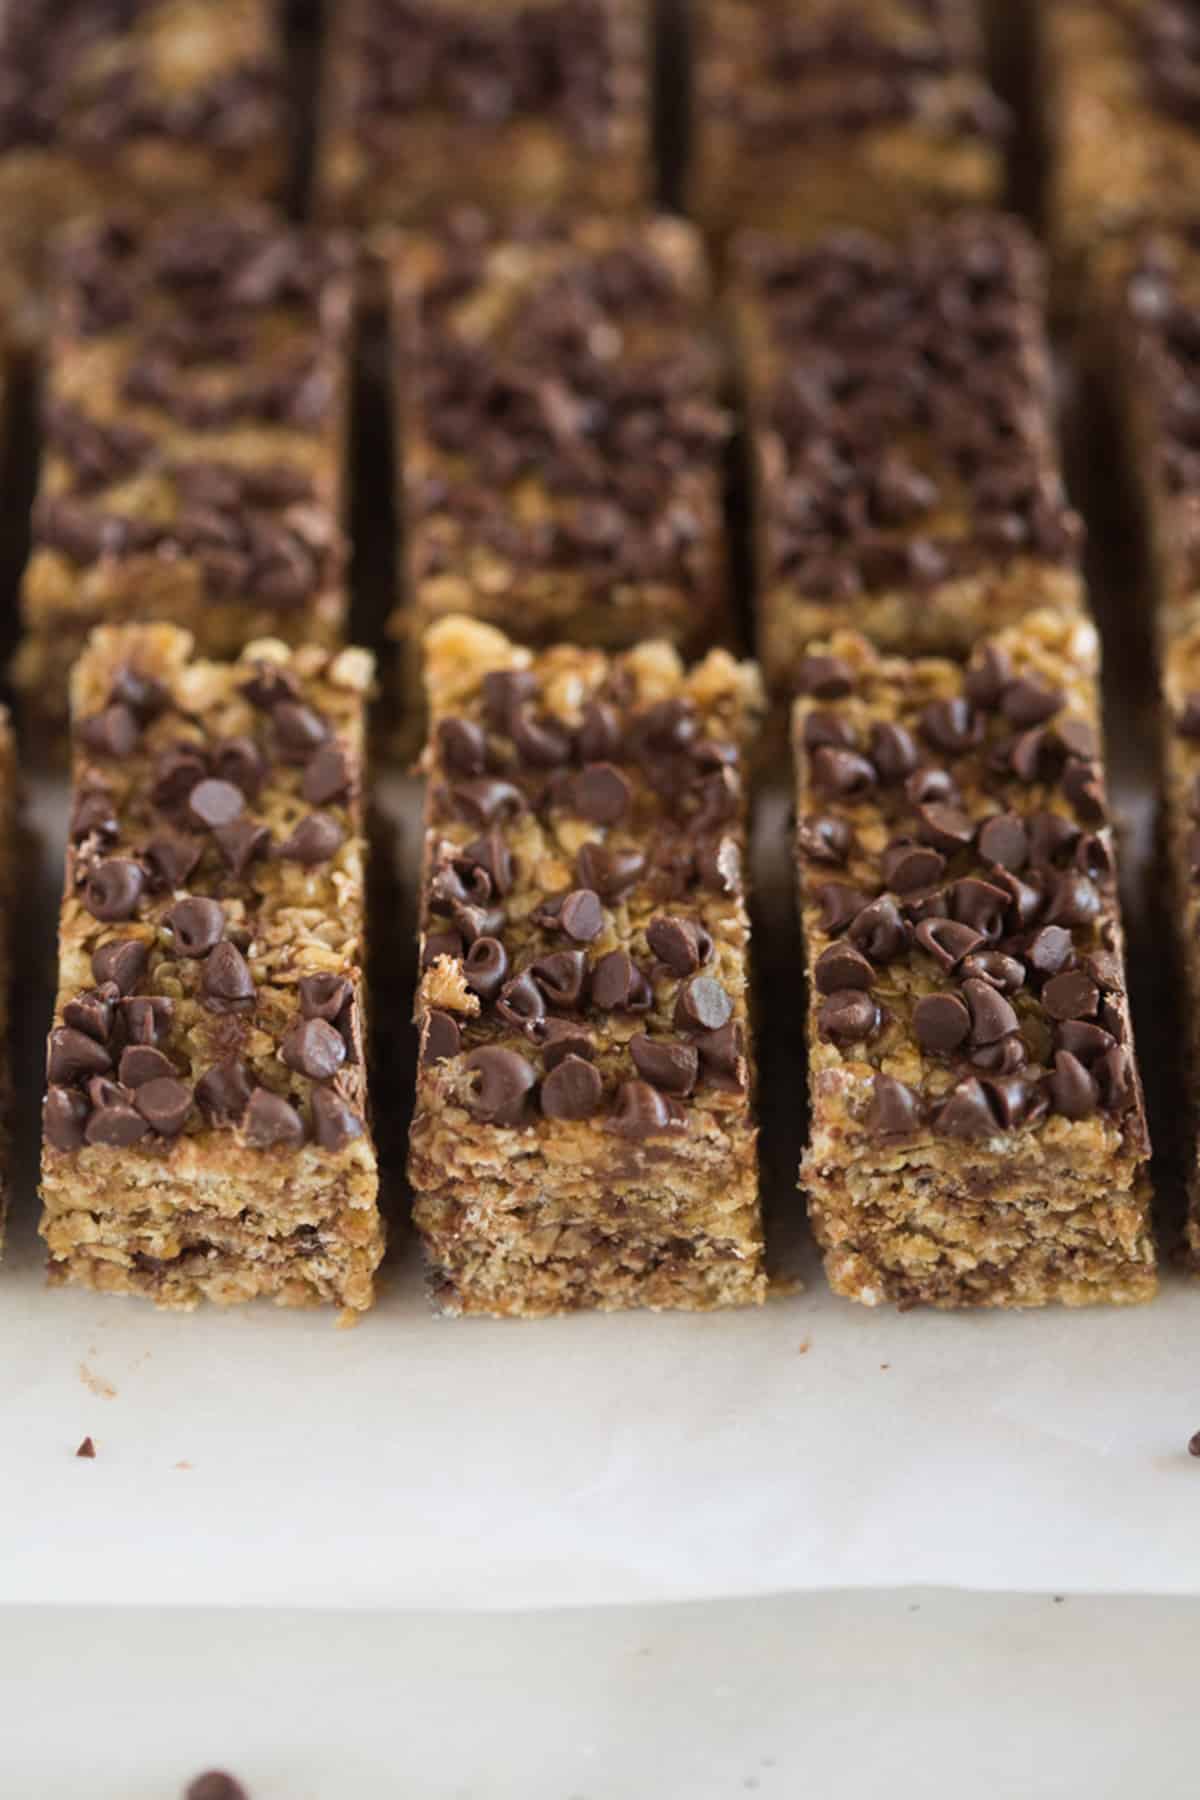 Homemade granola bars topped with mini chocolate chips, cut into bars and ready to eat.